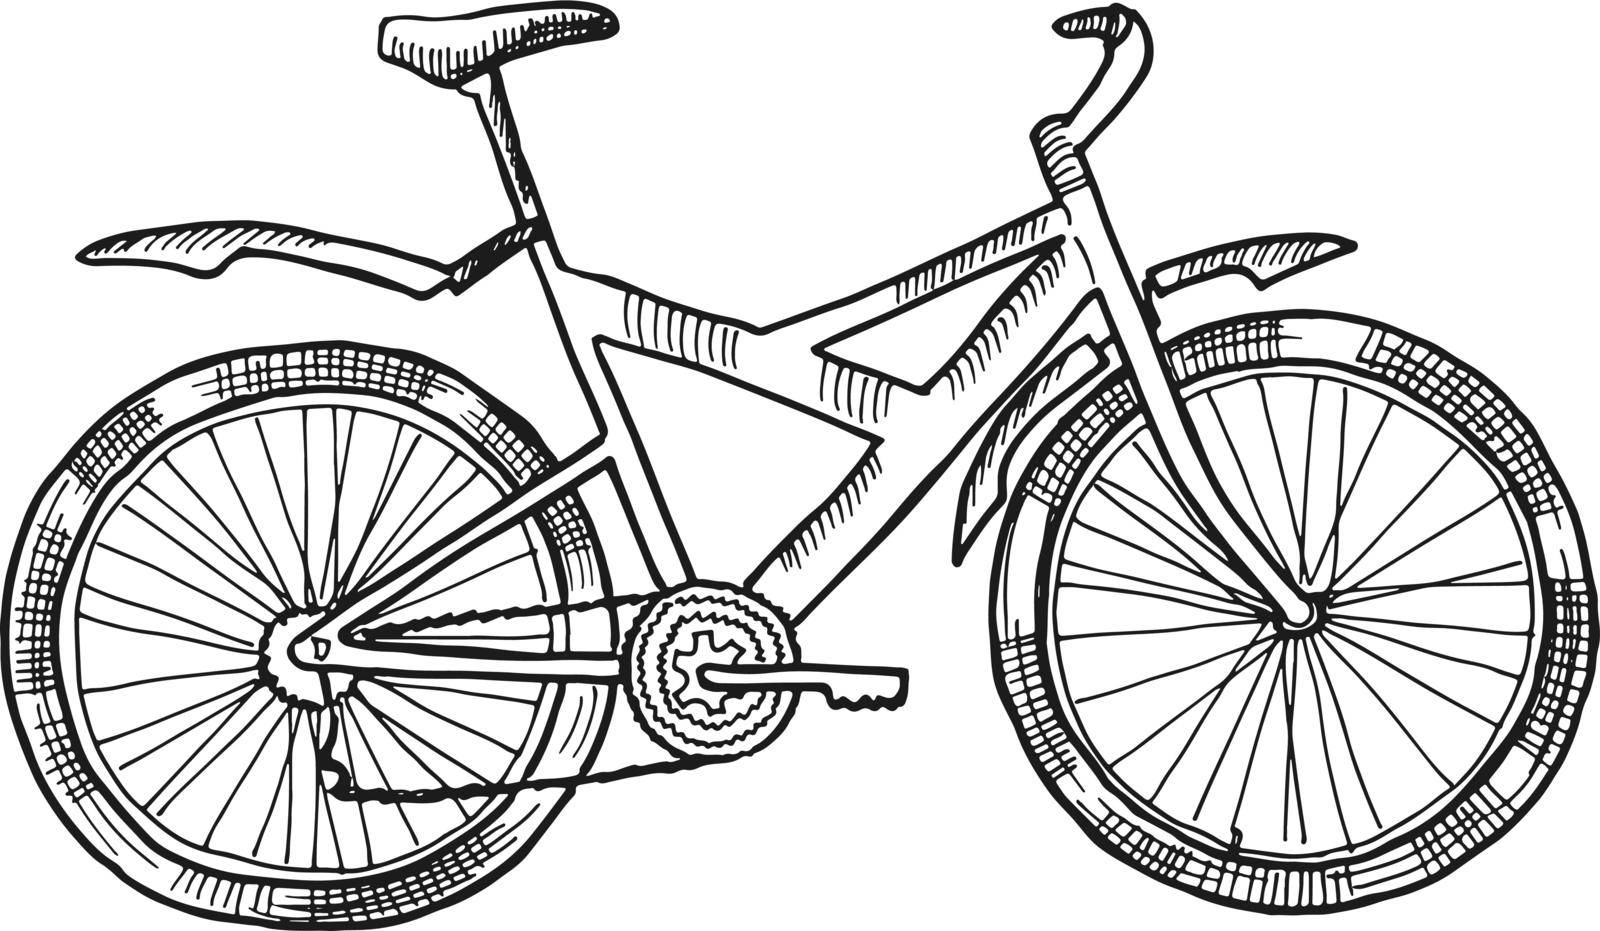 Bicycle sketch. Hand drawn vehicle. Eco transport by ONYXprj